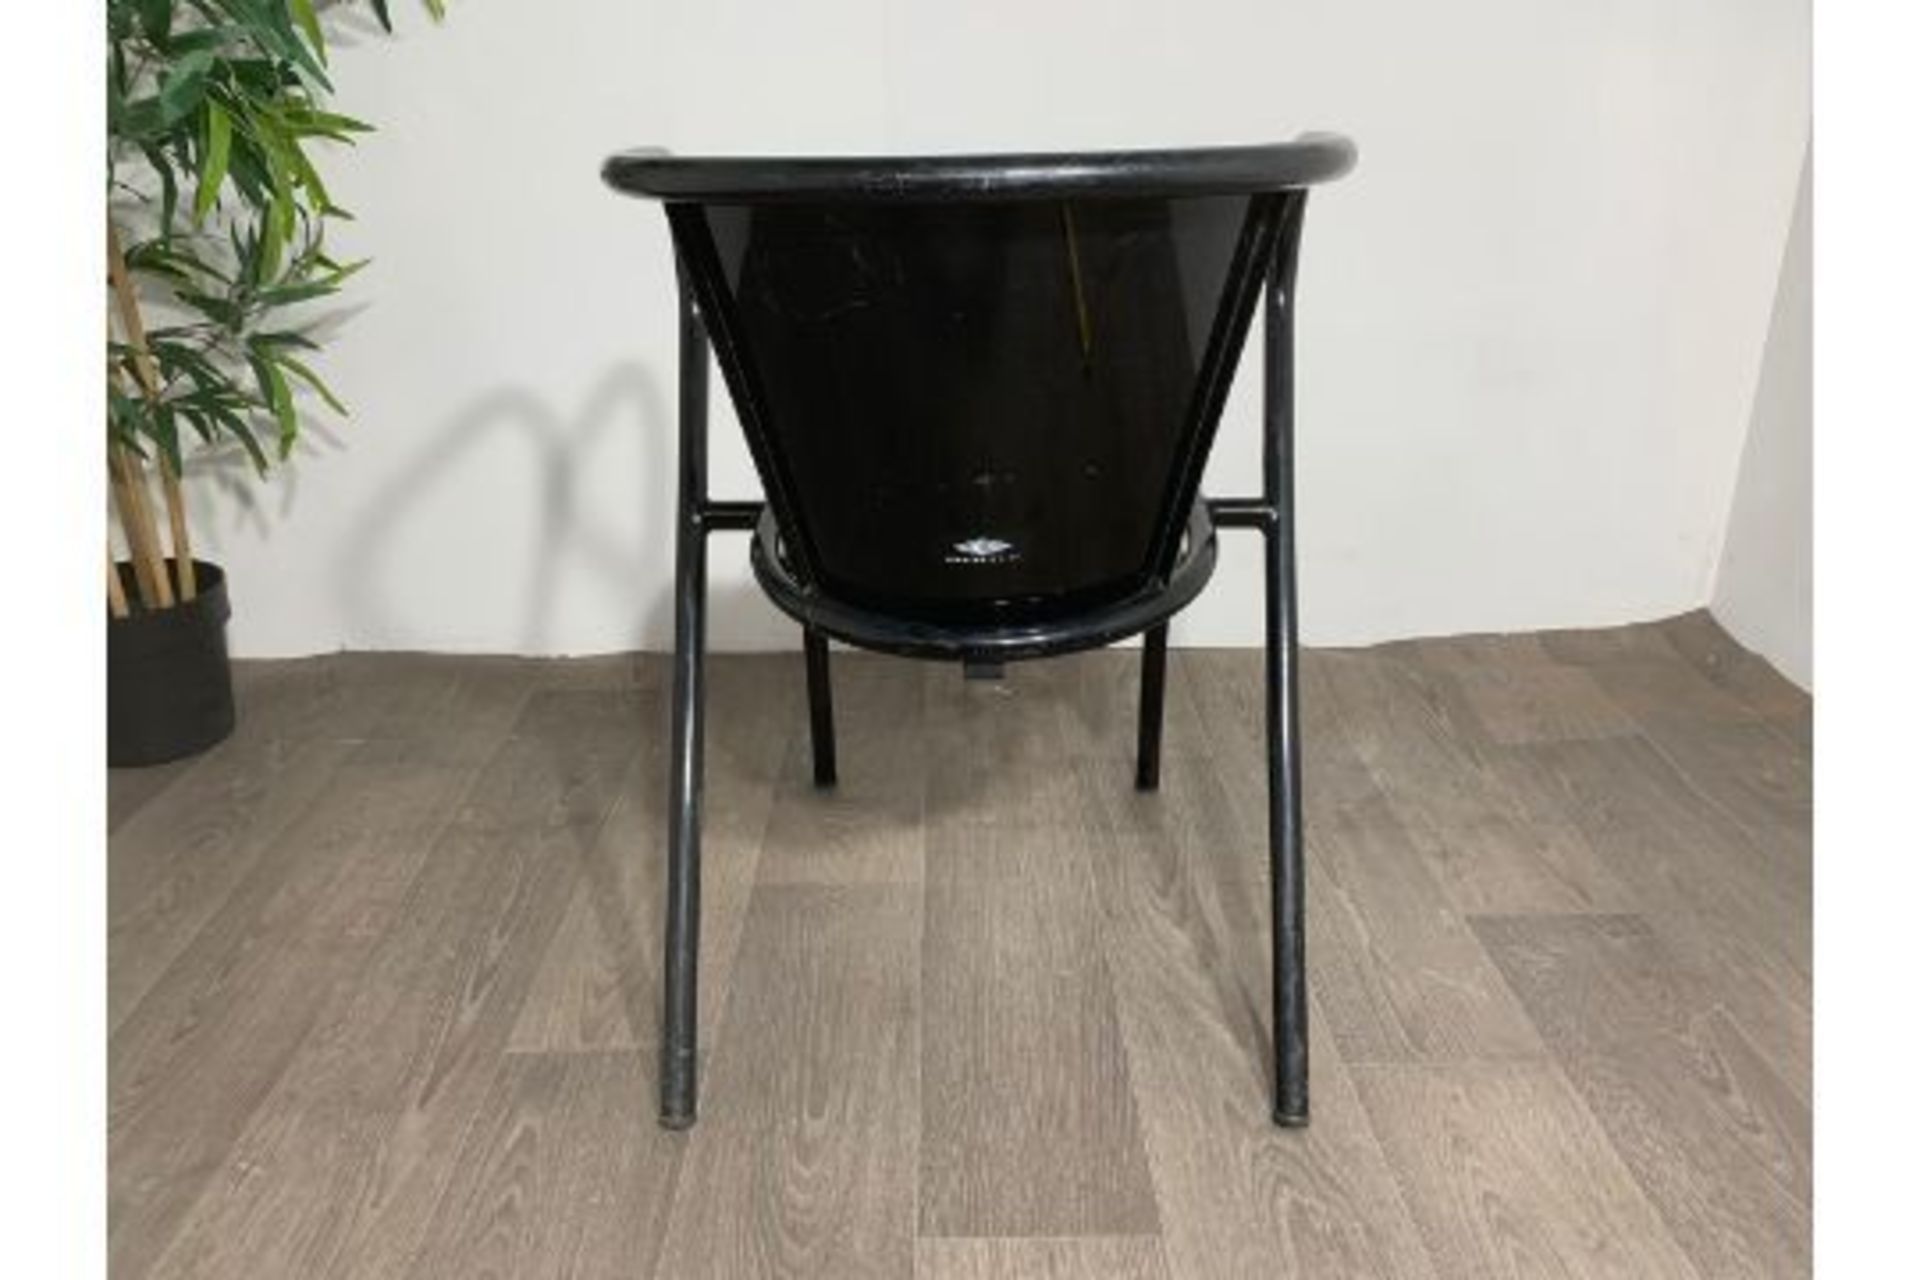 Adico 5008 Black Chair With Wooden Seat x2 - Image 3 of 6